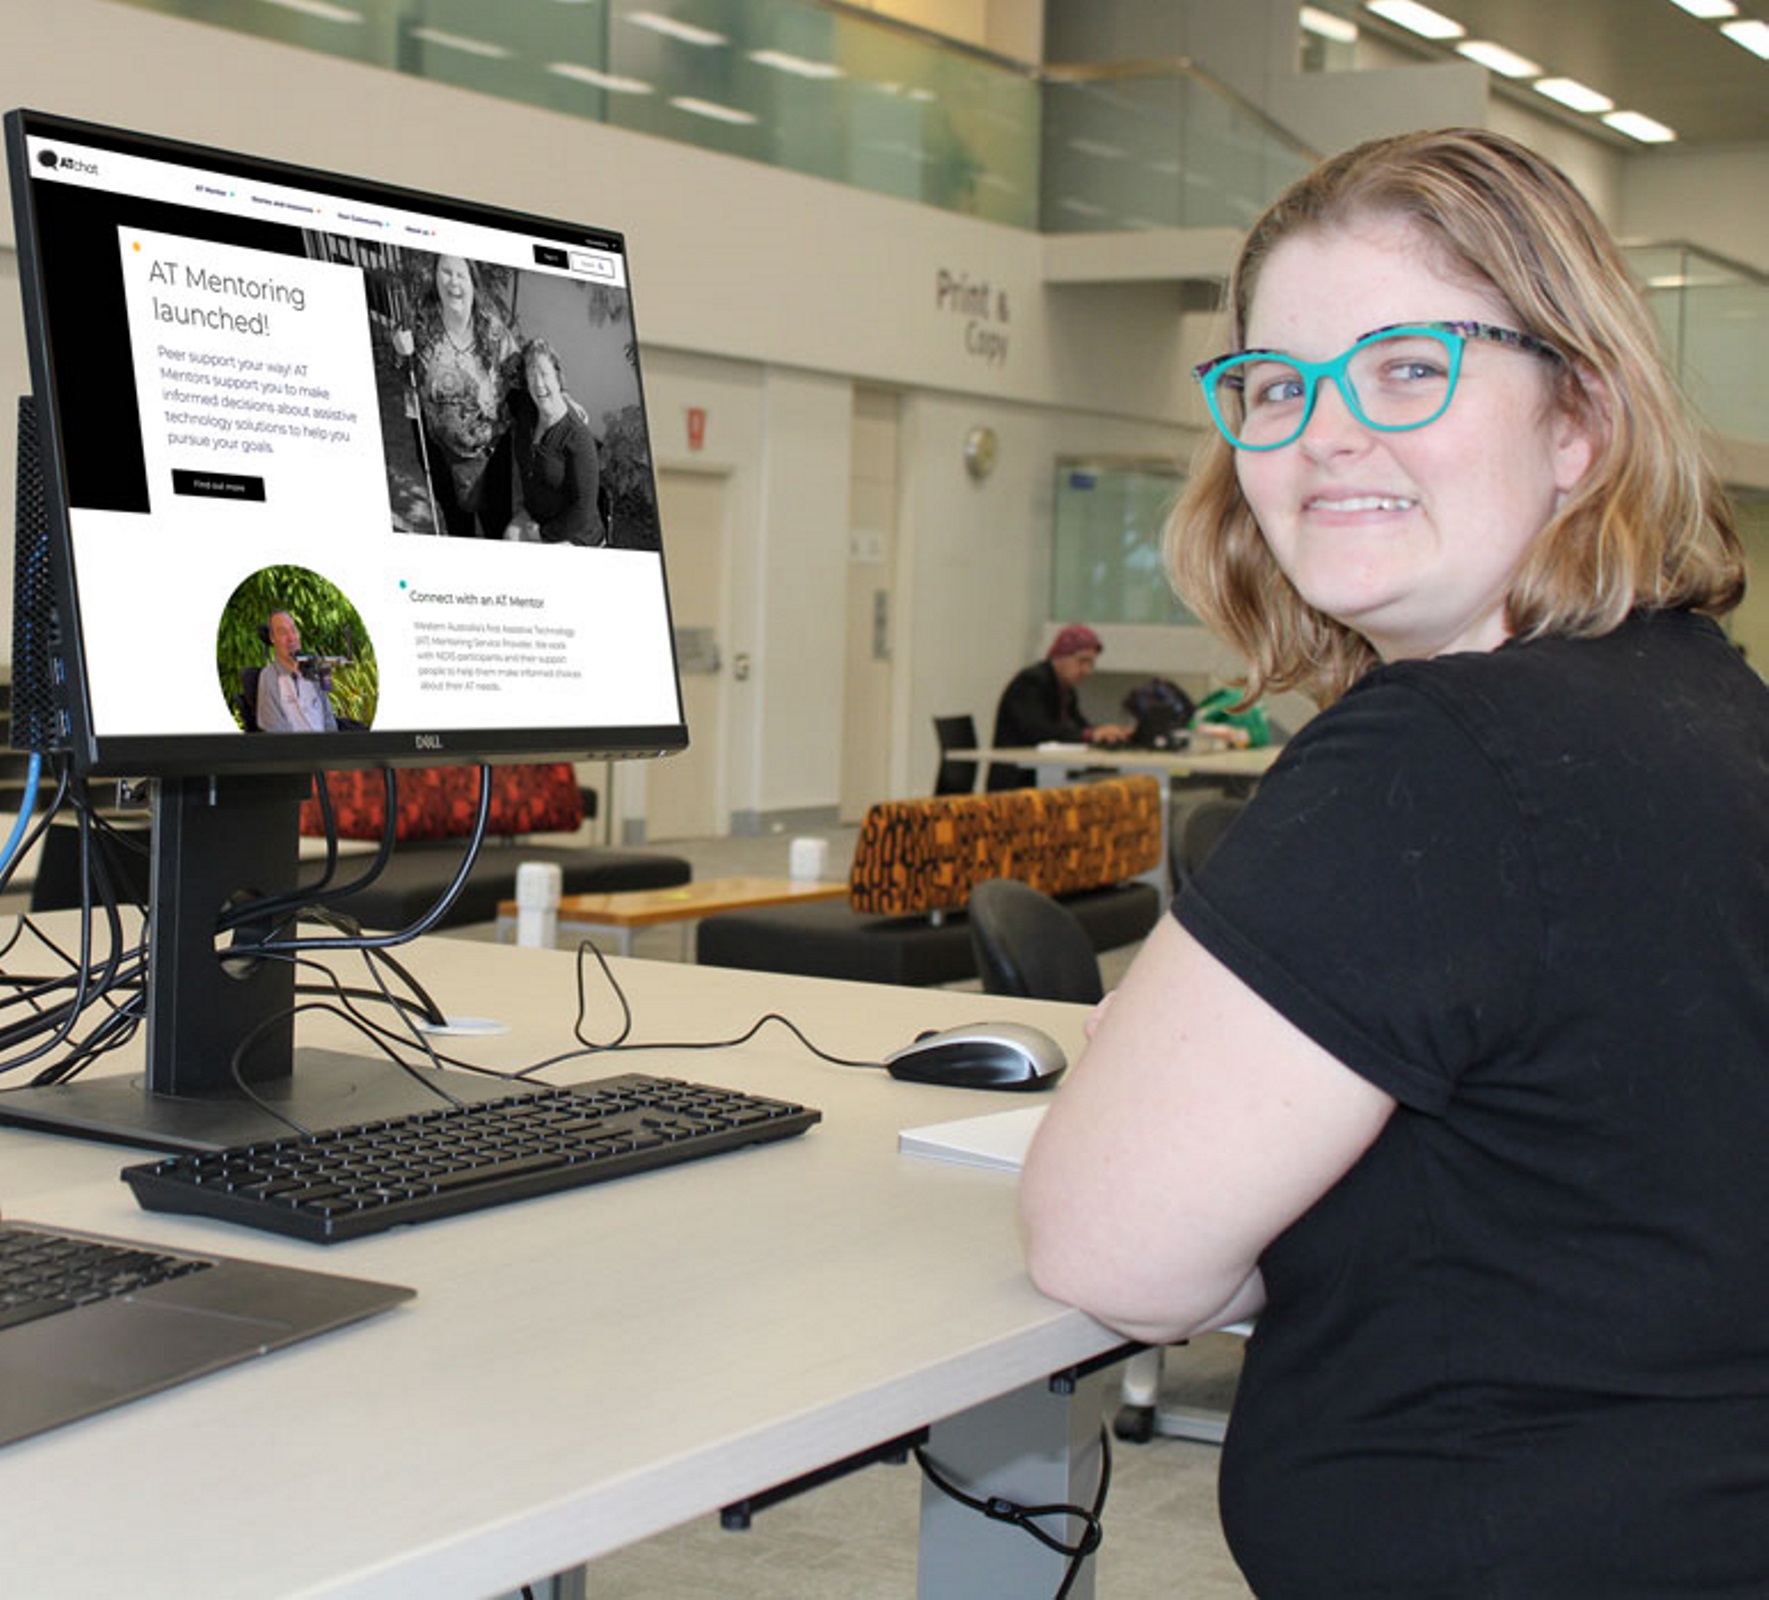 A young lady is seated at her computer. She is turned to smile at the camera. On her screen is the AT Chat website.